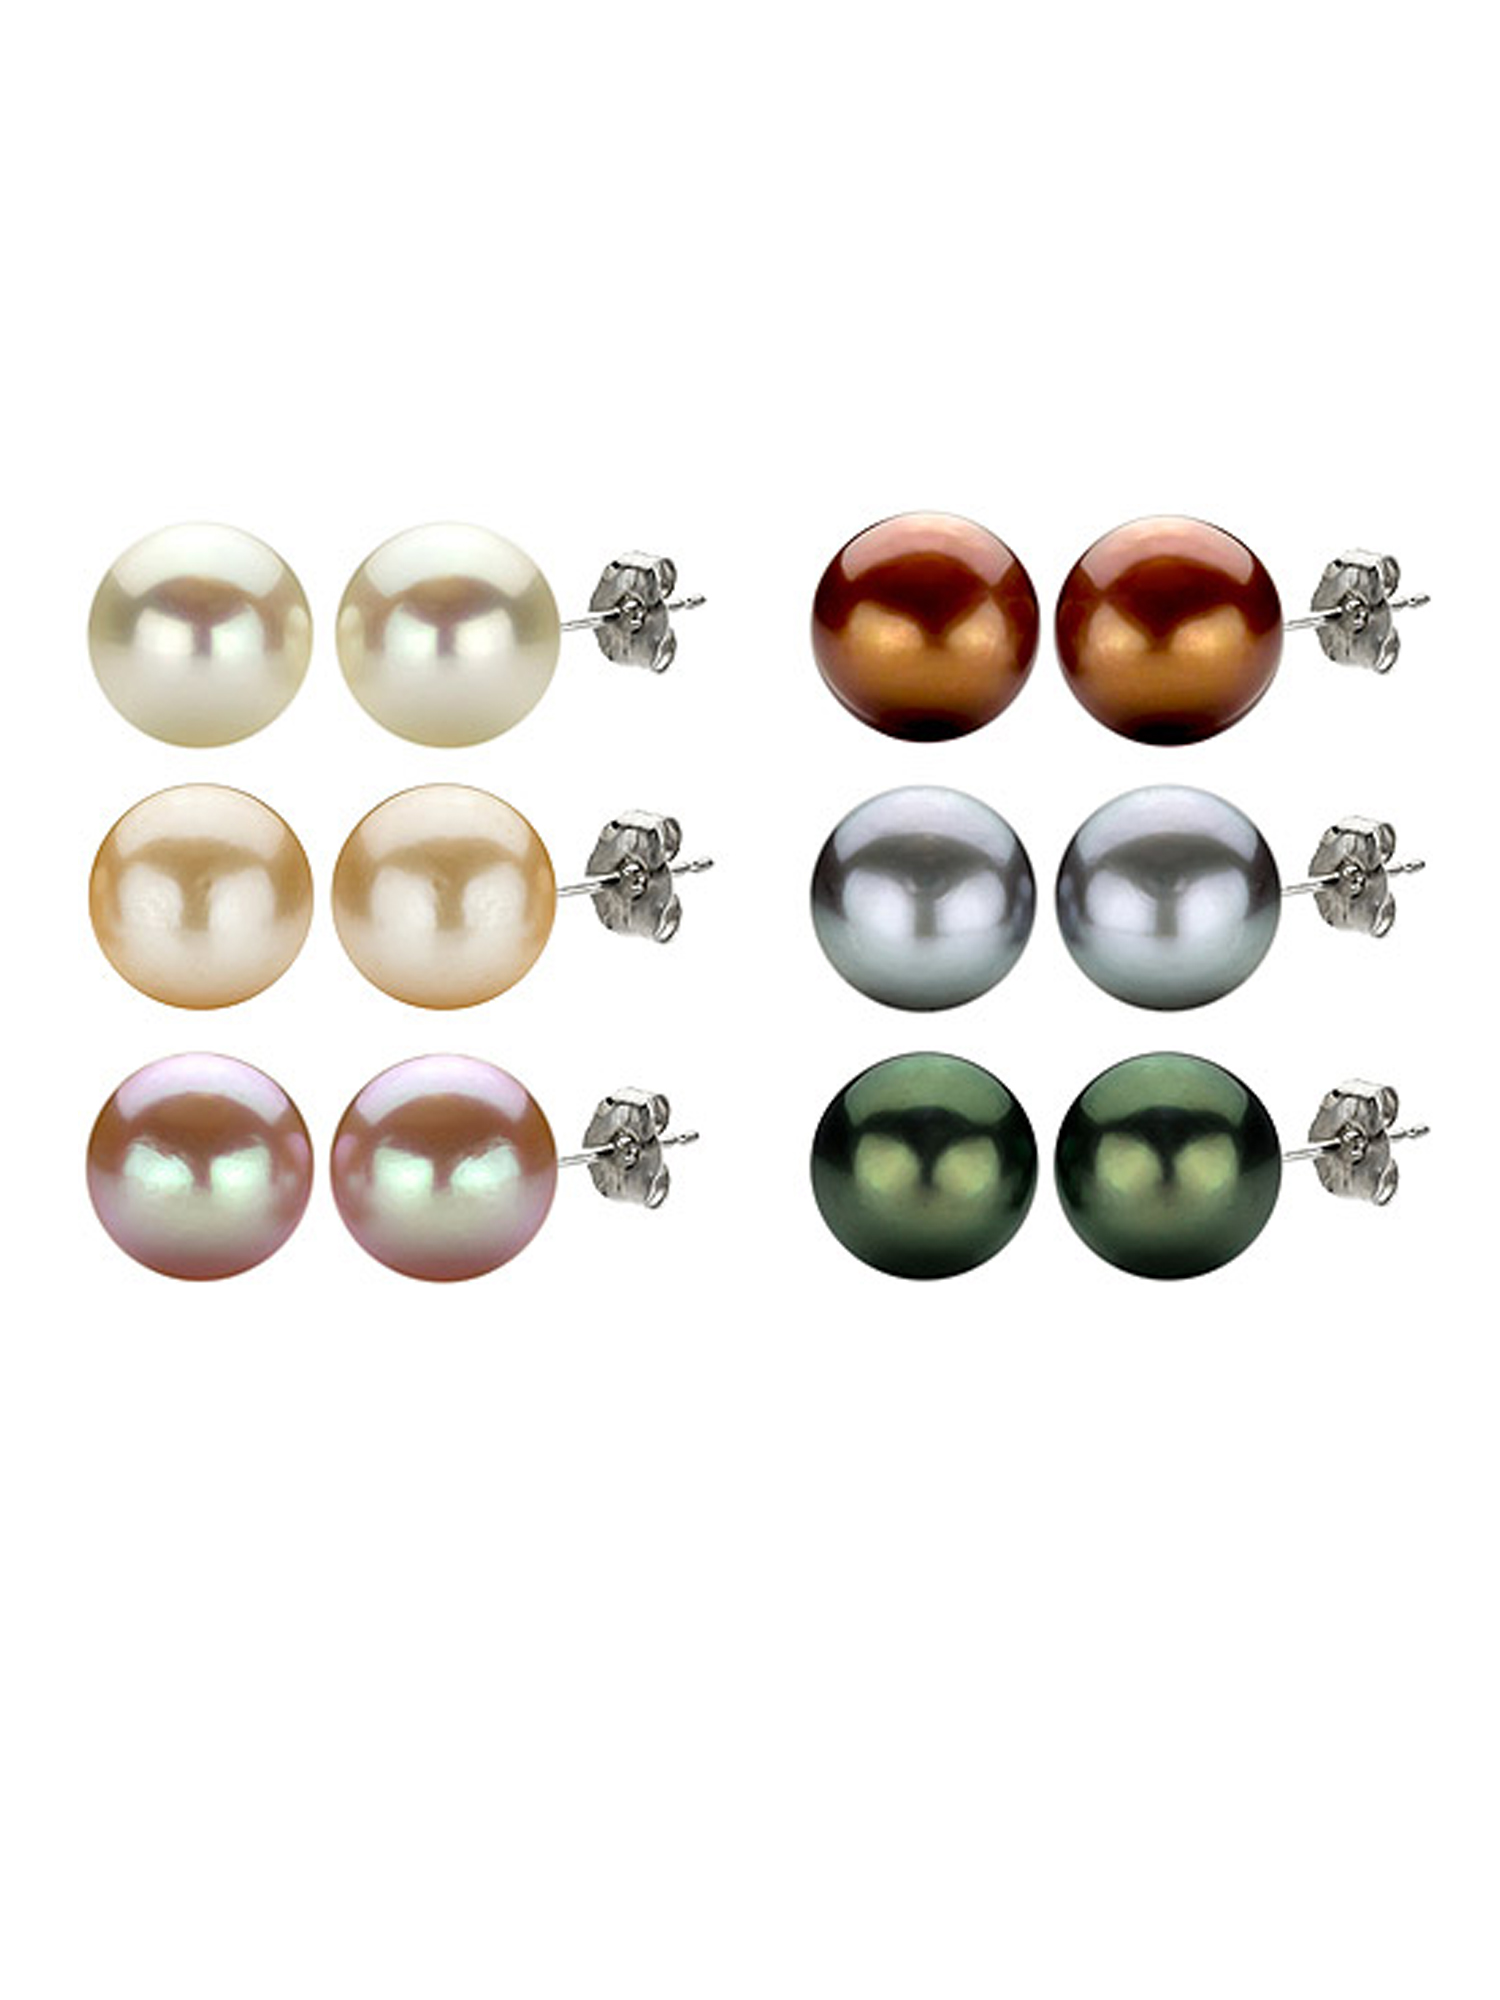 ADDURN 8-9mm White, Black, Pink, Grey, Brown and Peach Cultured Freshwater Pearl Earrings Set with Sterling Silver Clasps, 6 Pairs - image 1 of 3